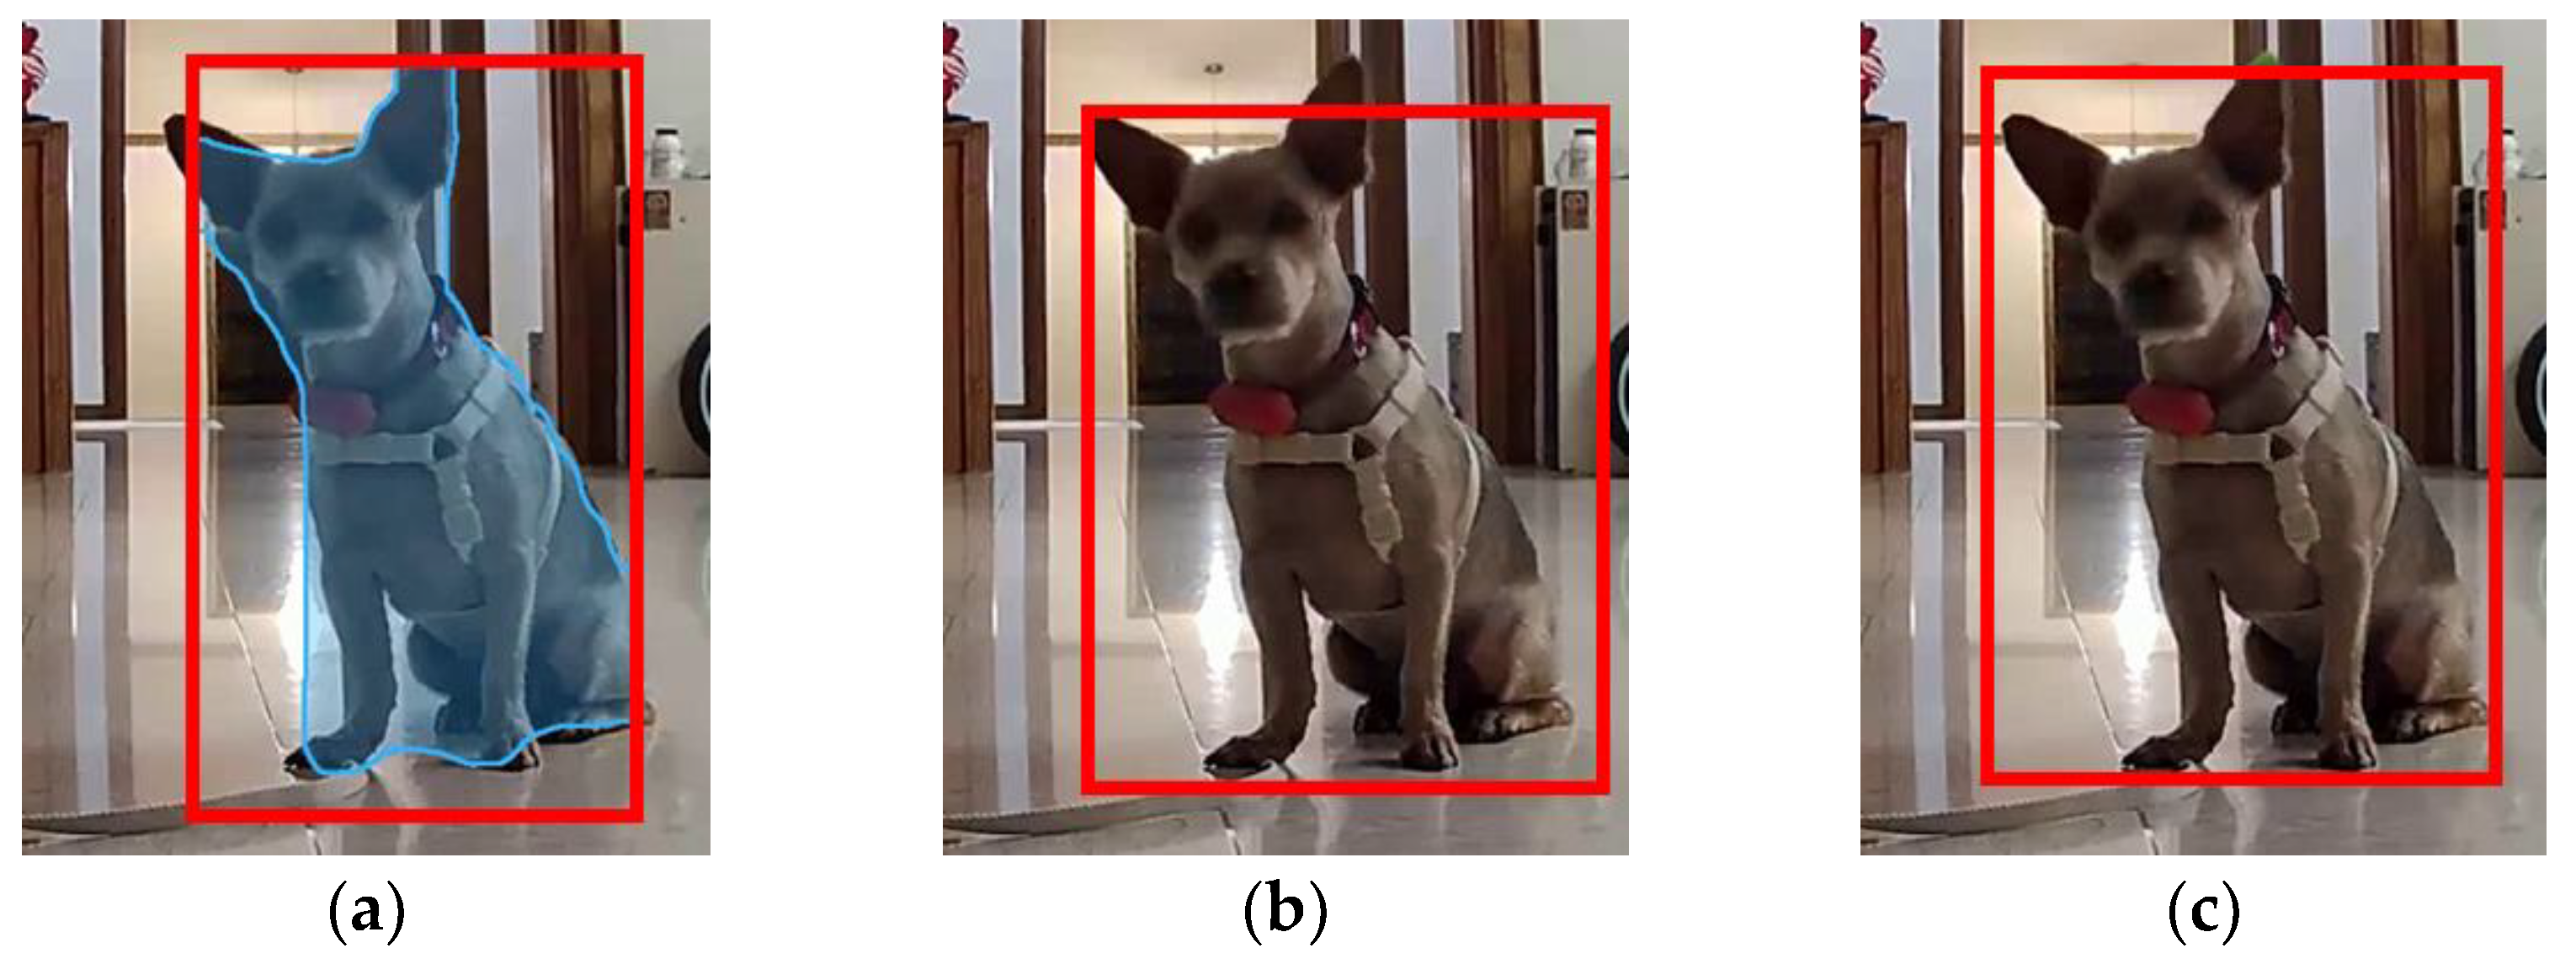 Applied Sciences | Free Full-Text | Dog Behavior Recognition Based on  Multimodal Data from a Camera and Wearable Device